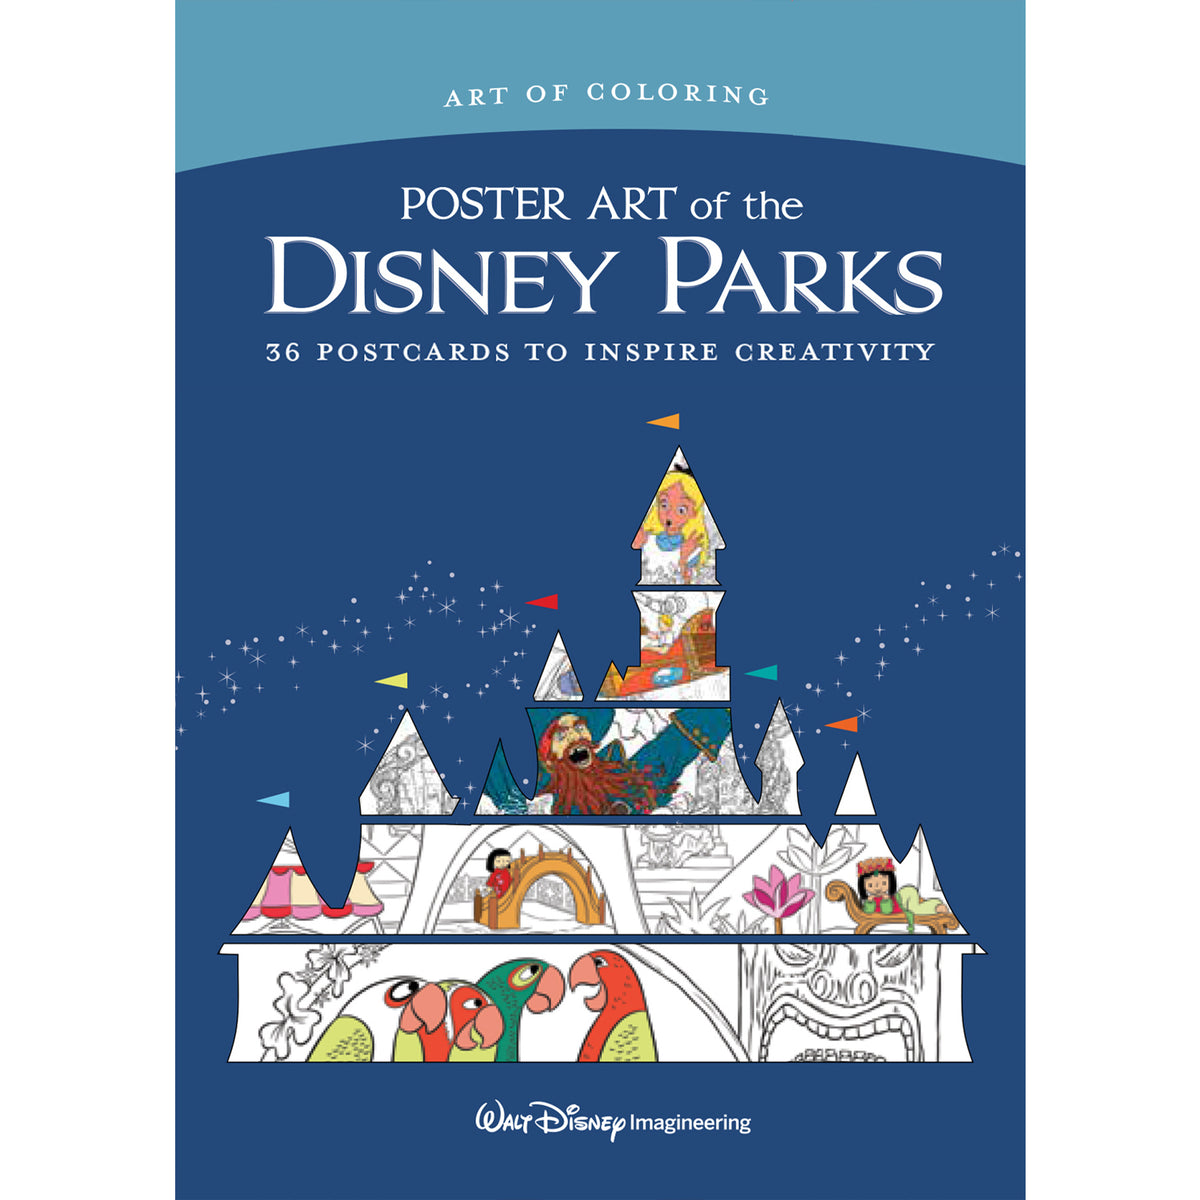 Art of Coloring: Poster Art of the Disney Parks Coloring Postcards